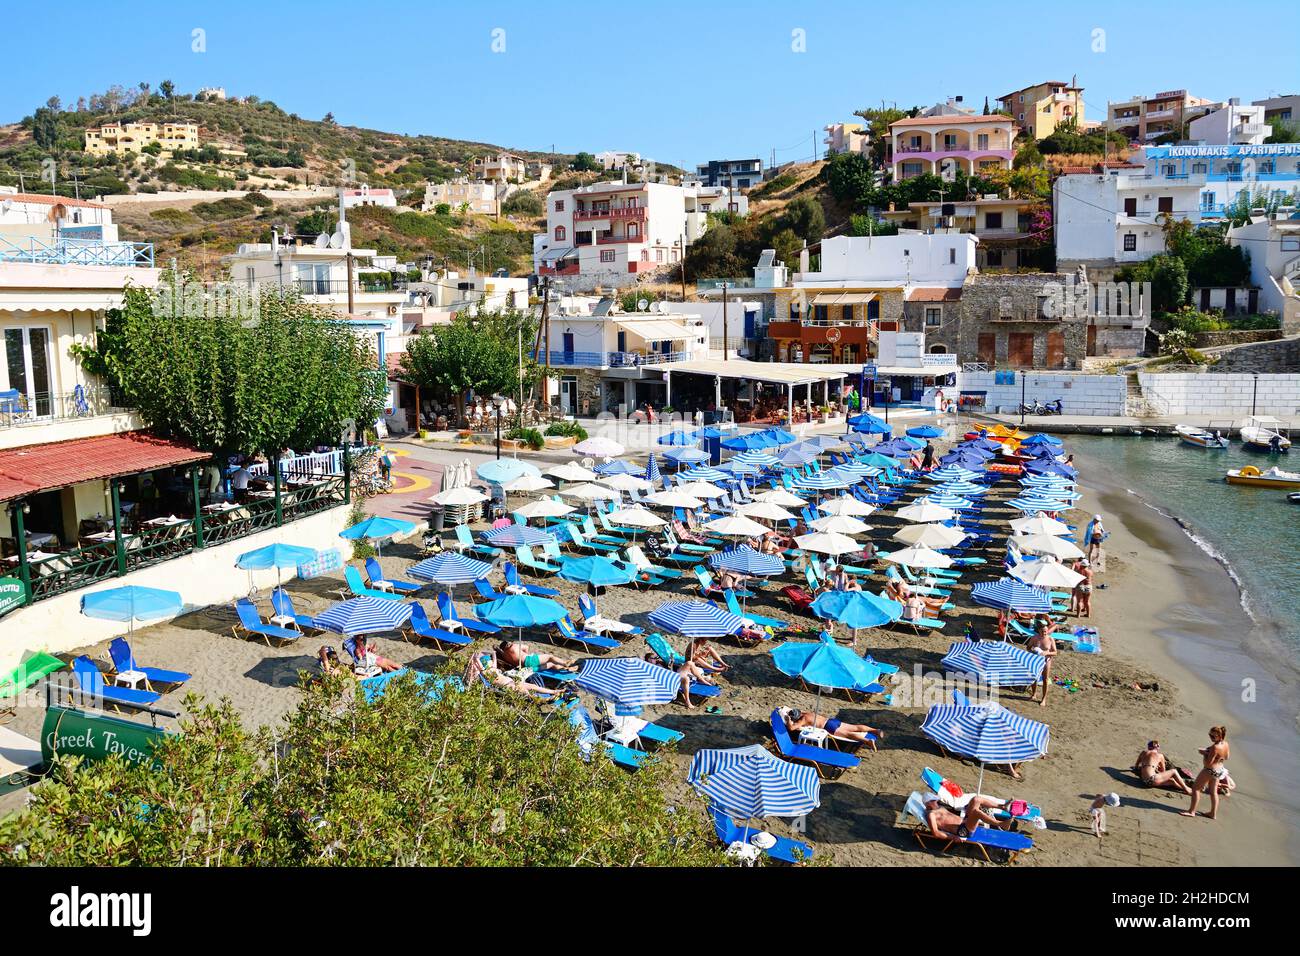 Elevated view the beach with tavernas and shops to the rear, Bali, Crete, Greece, Europe. Stock Photo